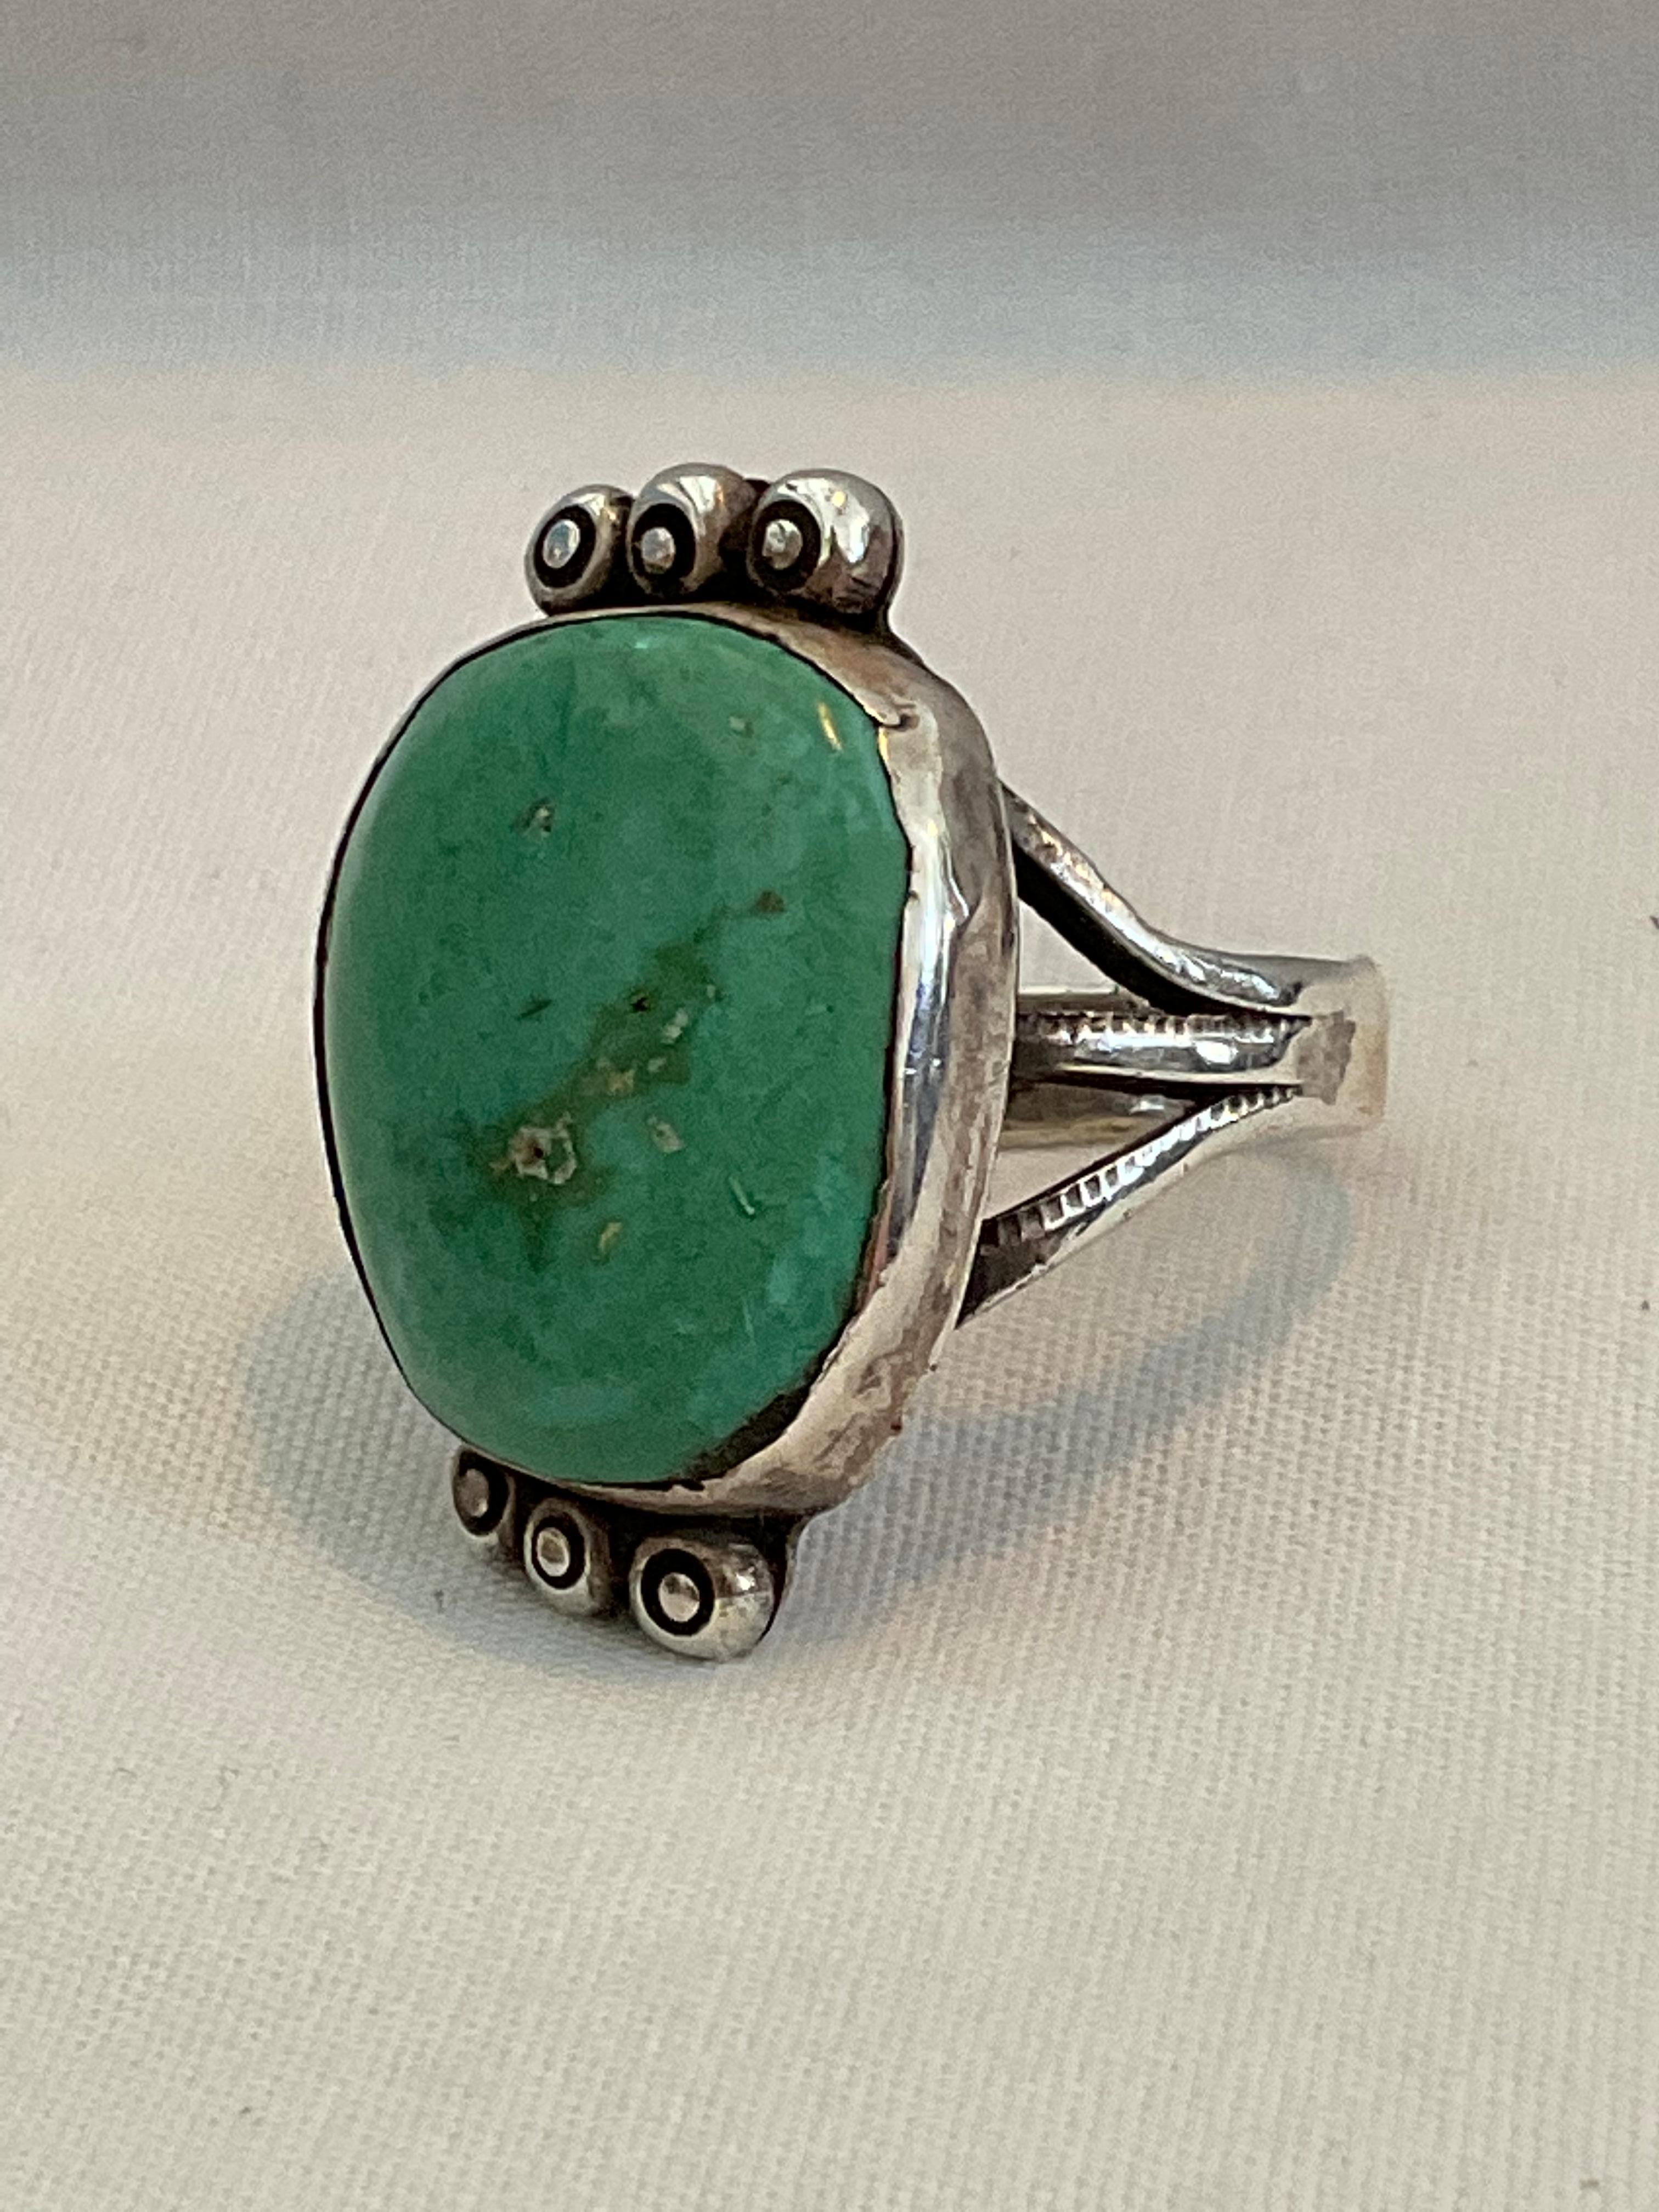 Carico Lake Turquoise comes from a mine located in South of Battle Mountain in Lander County, Nevada. It is best known for its spring green color, caused by the mineral Faustite combining with Zinc and is highly collectible by Turquoise